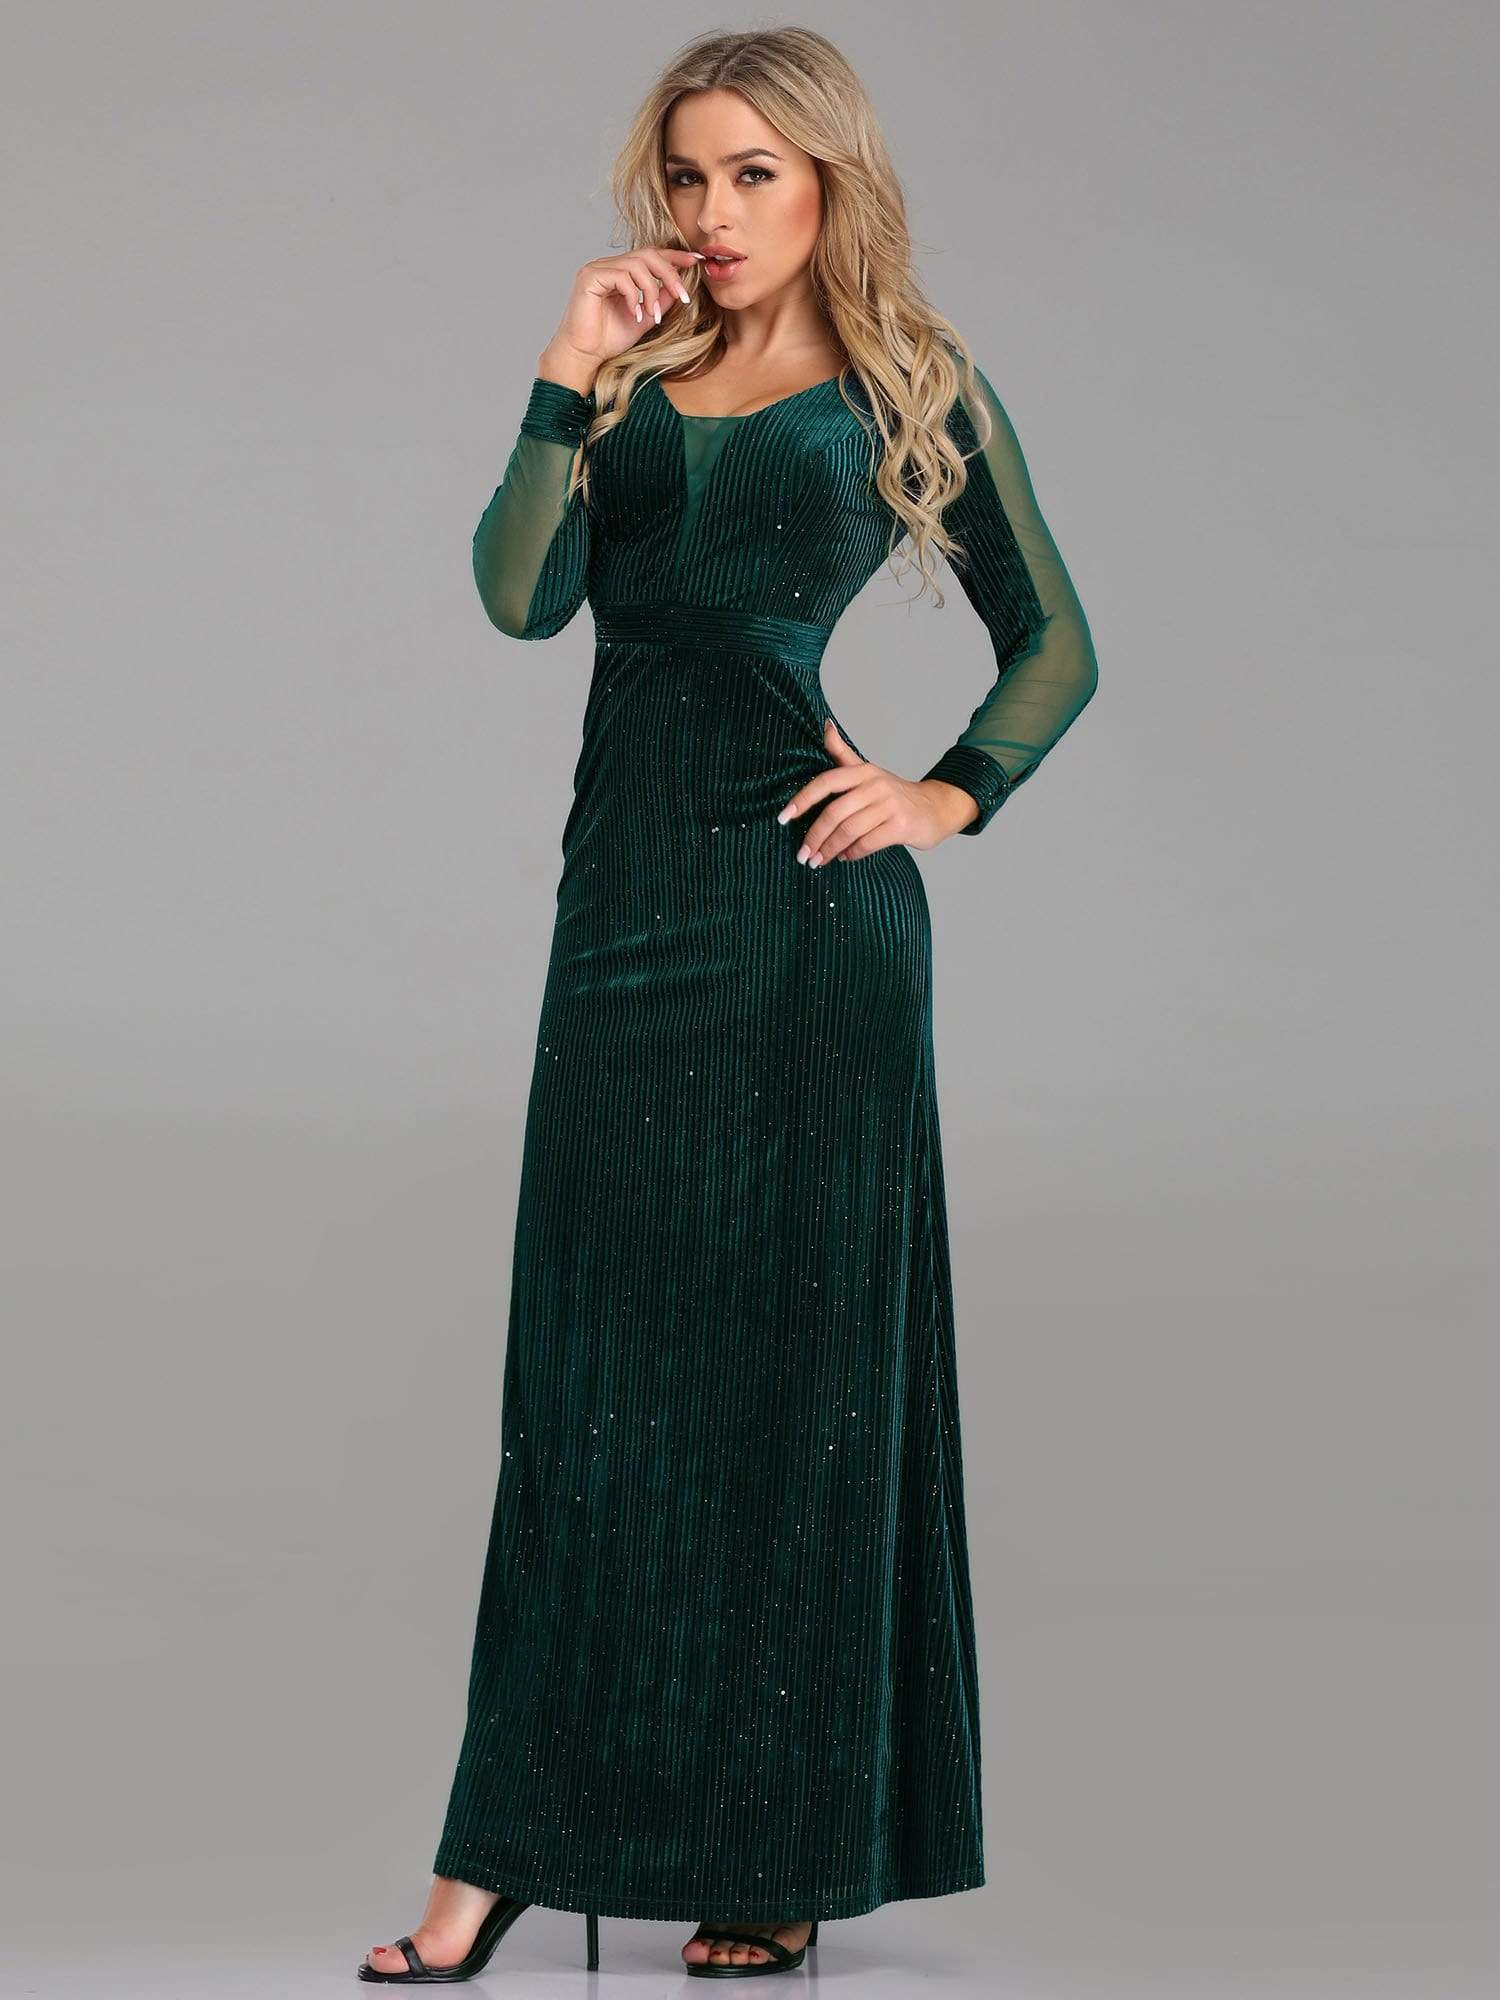 COLOR=Dark Green | Shimmery Evening Dress With Long Sleeves-Dark Green 4